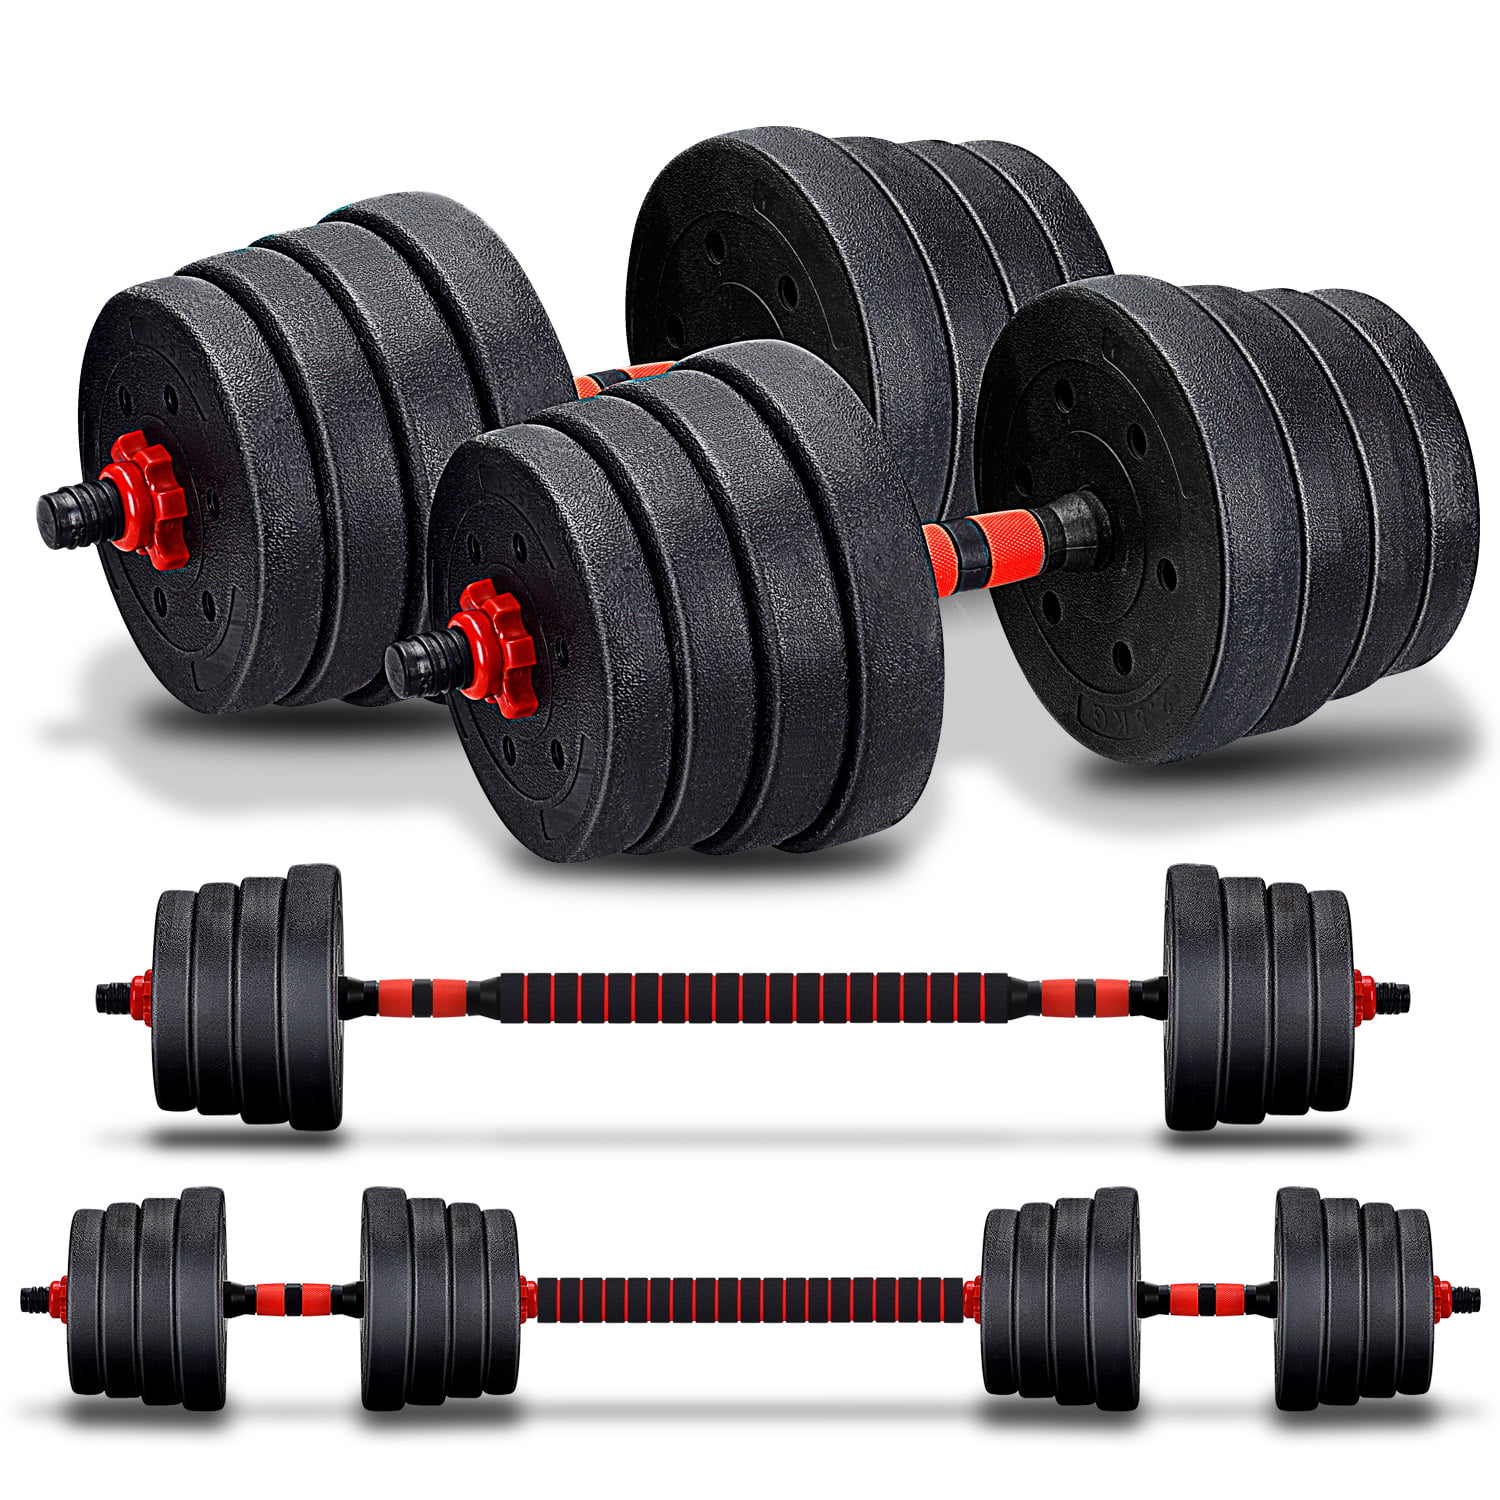 Details about   ❤ Adjustable Dumbbells 66/110LB Barbell Connector Options Each Other Conve 